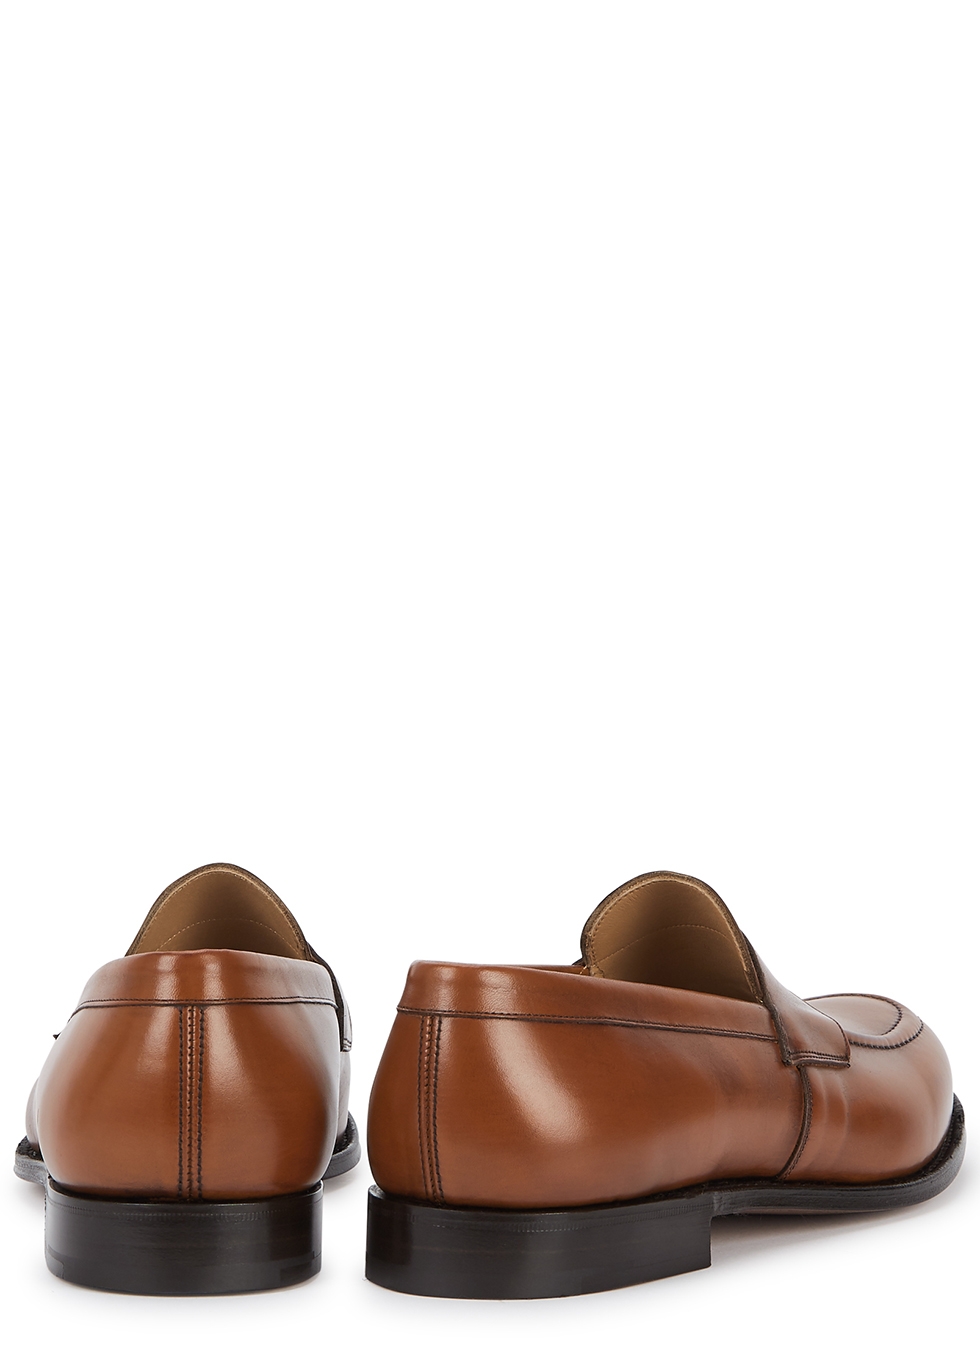 church's penny loafers